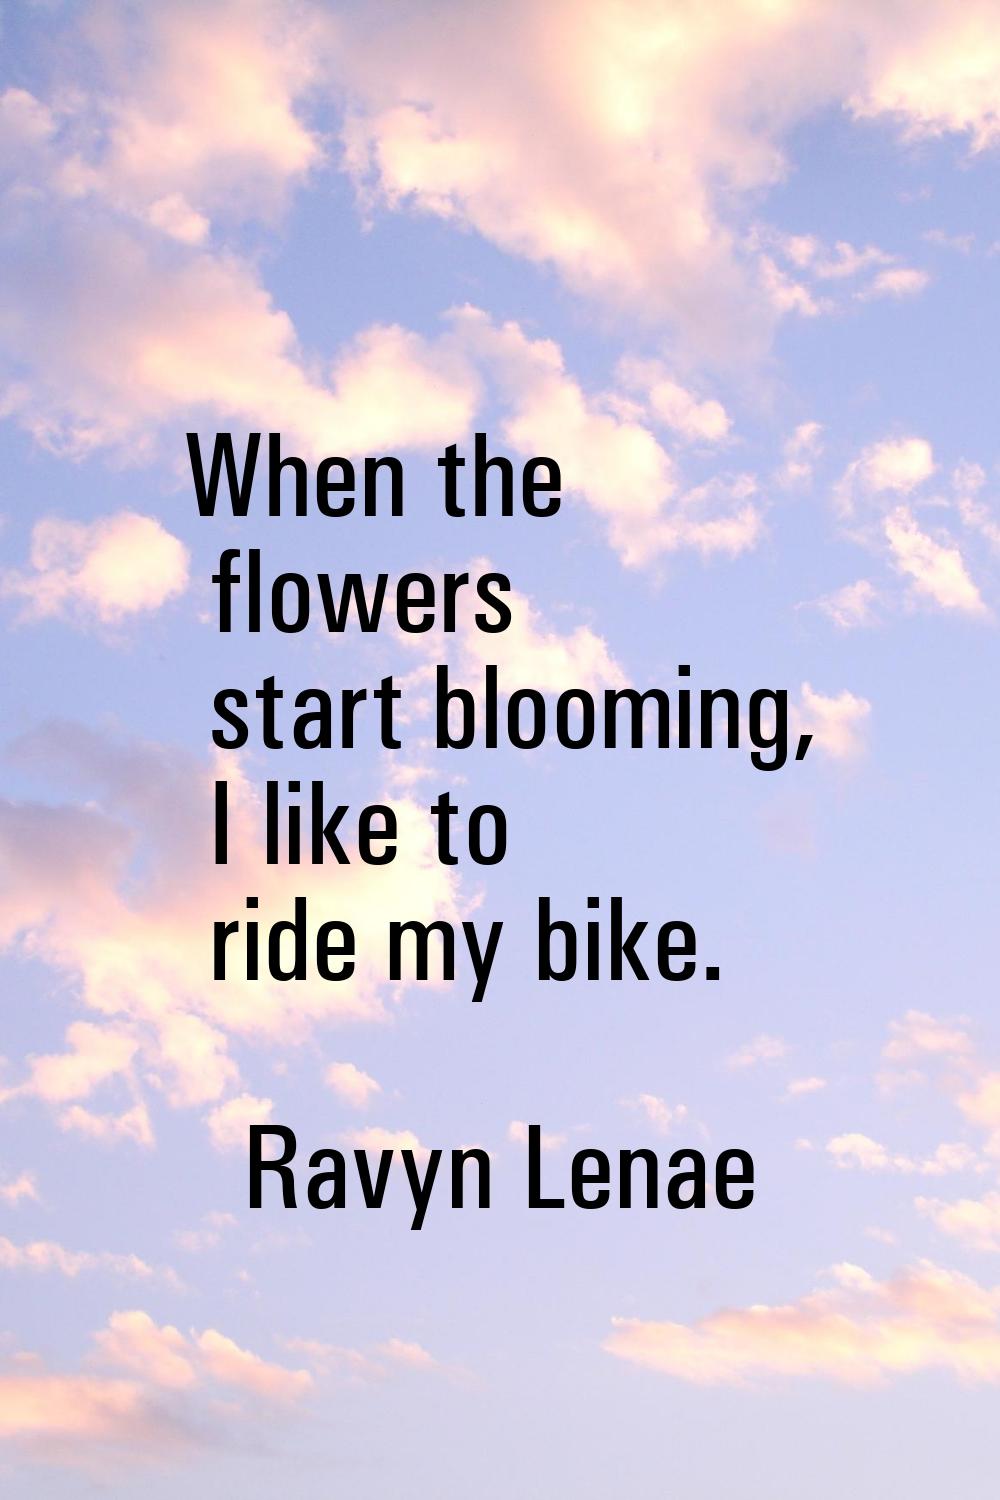 When the flowers start blooming, I like to ride my bike.